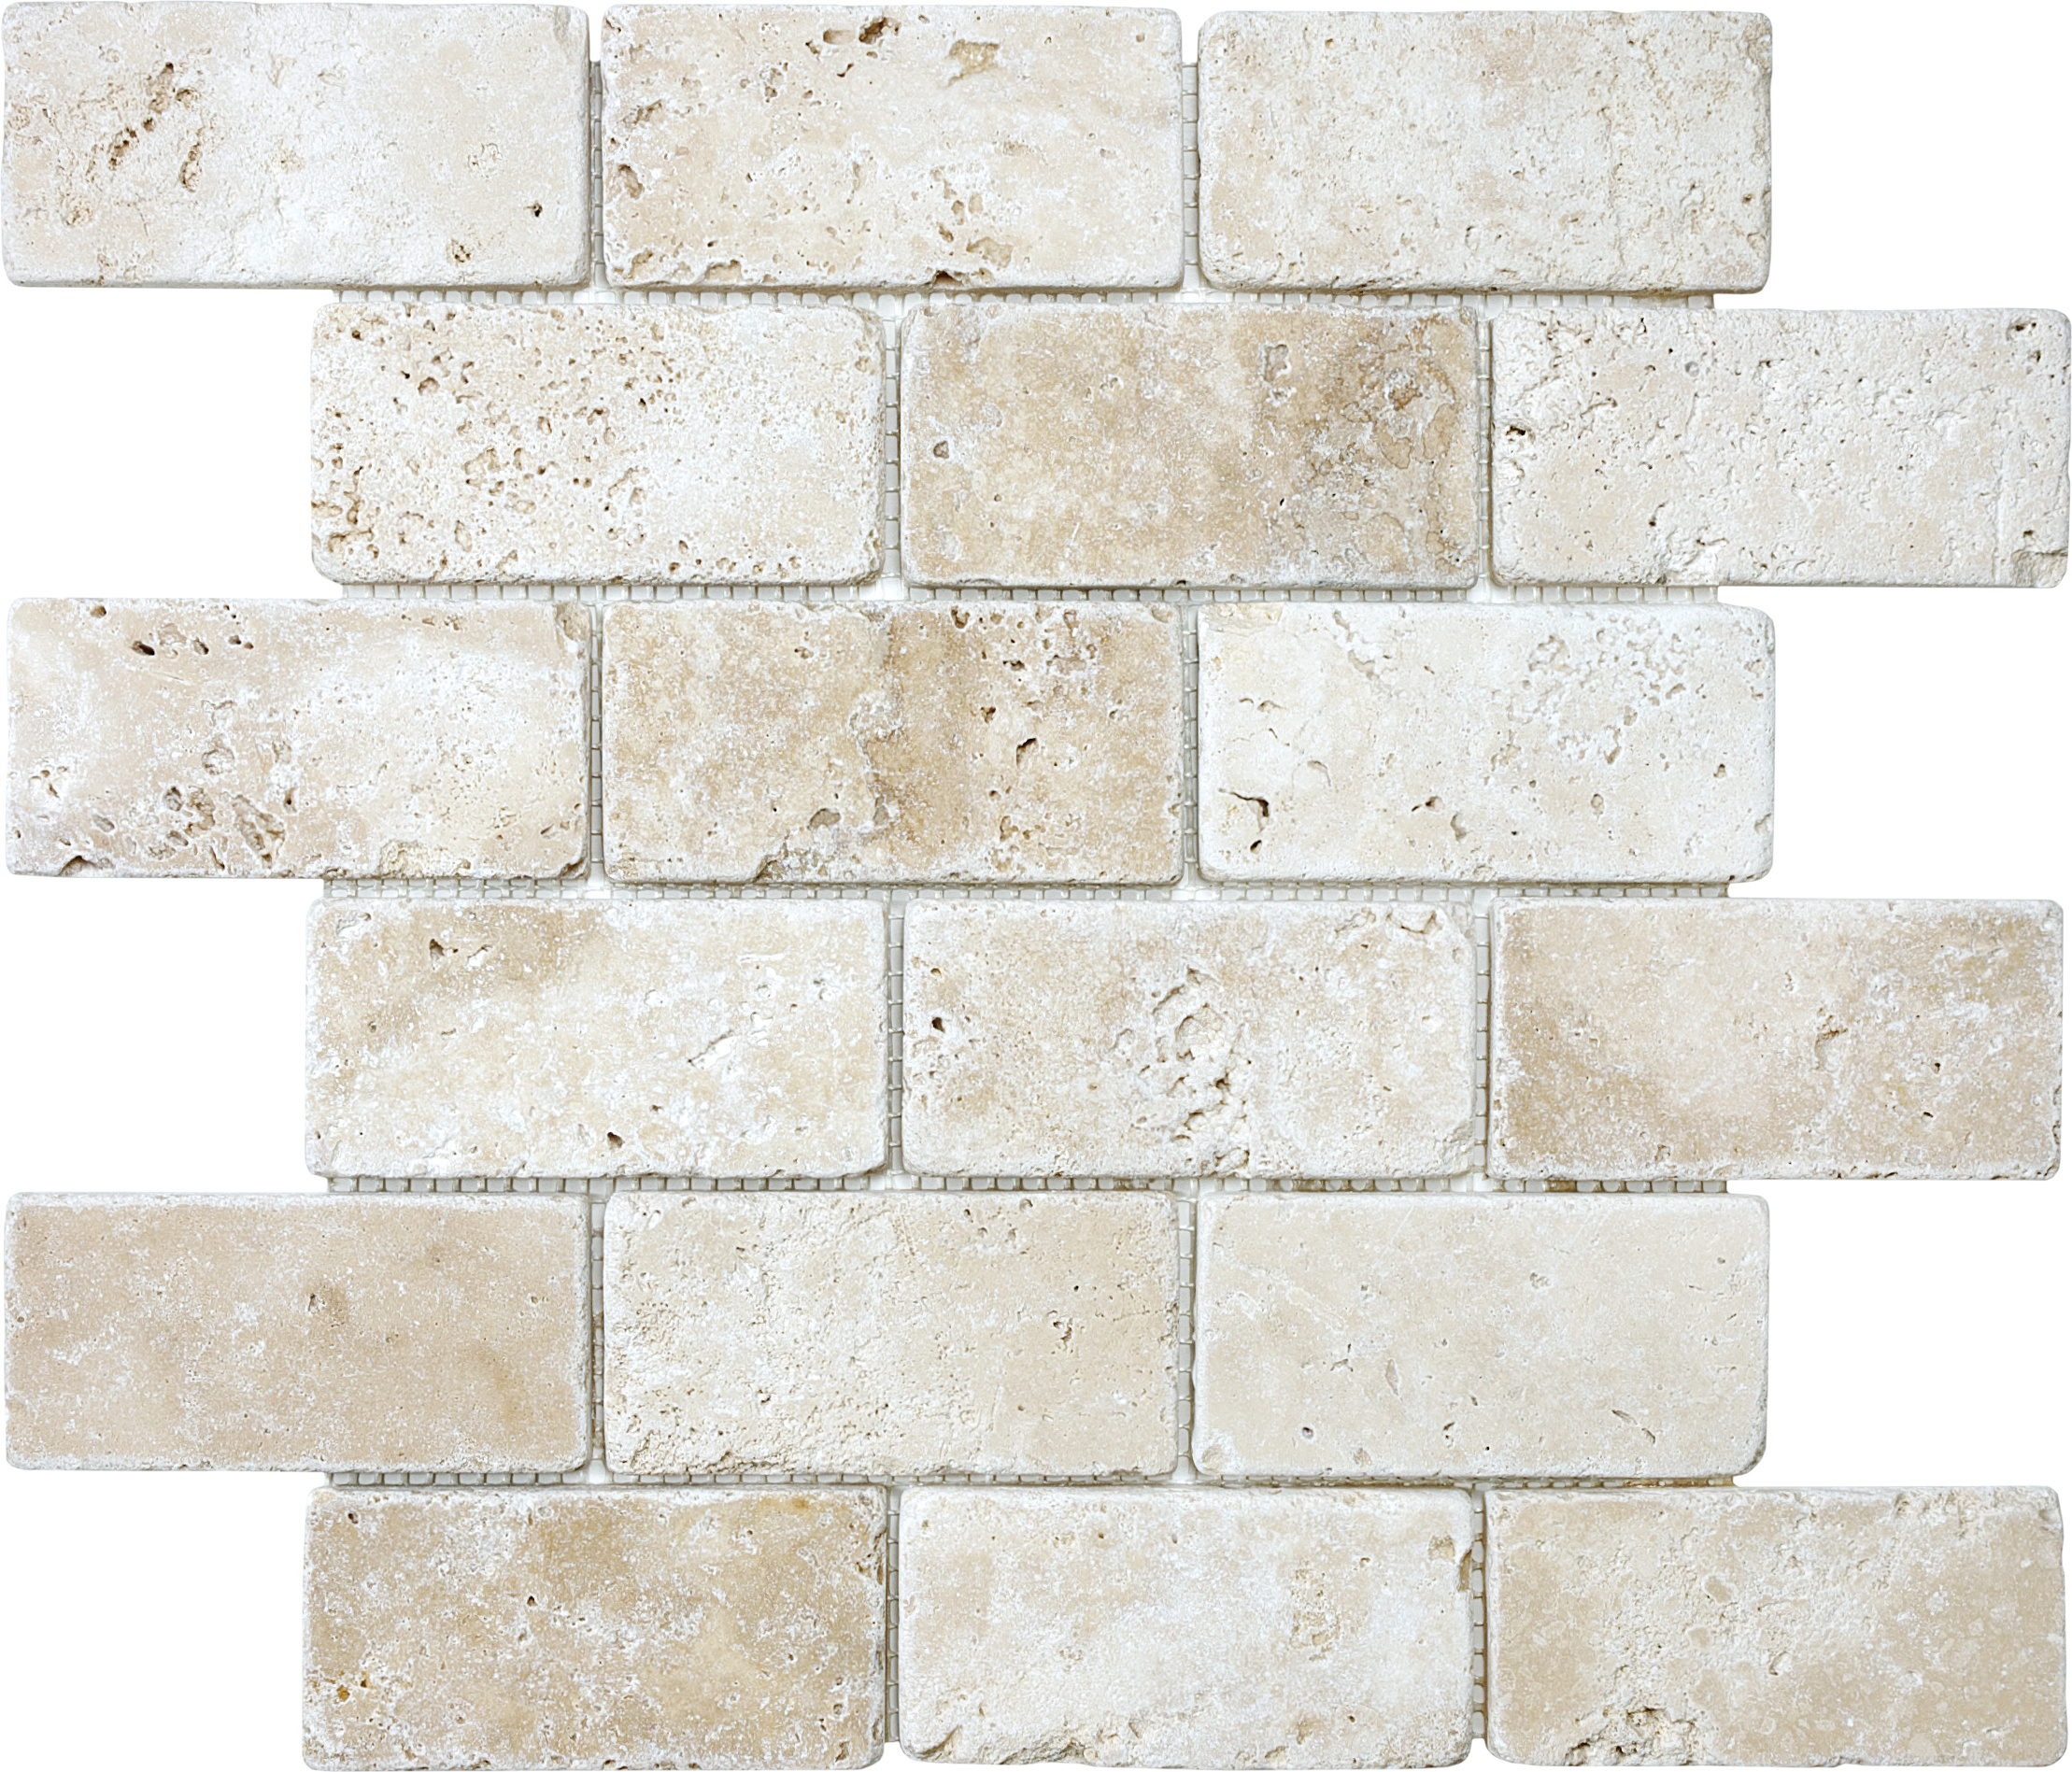 travertine brick offset 2x4-inch pattern natural stone mosaic from ivory anatolia collection distributed by surface group international tumbled finish tumbled edge mesh shape